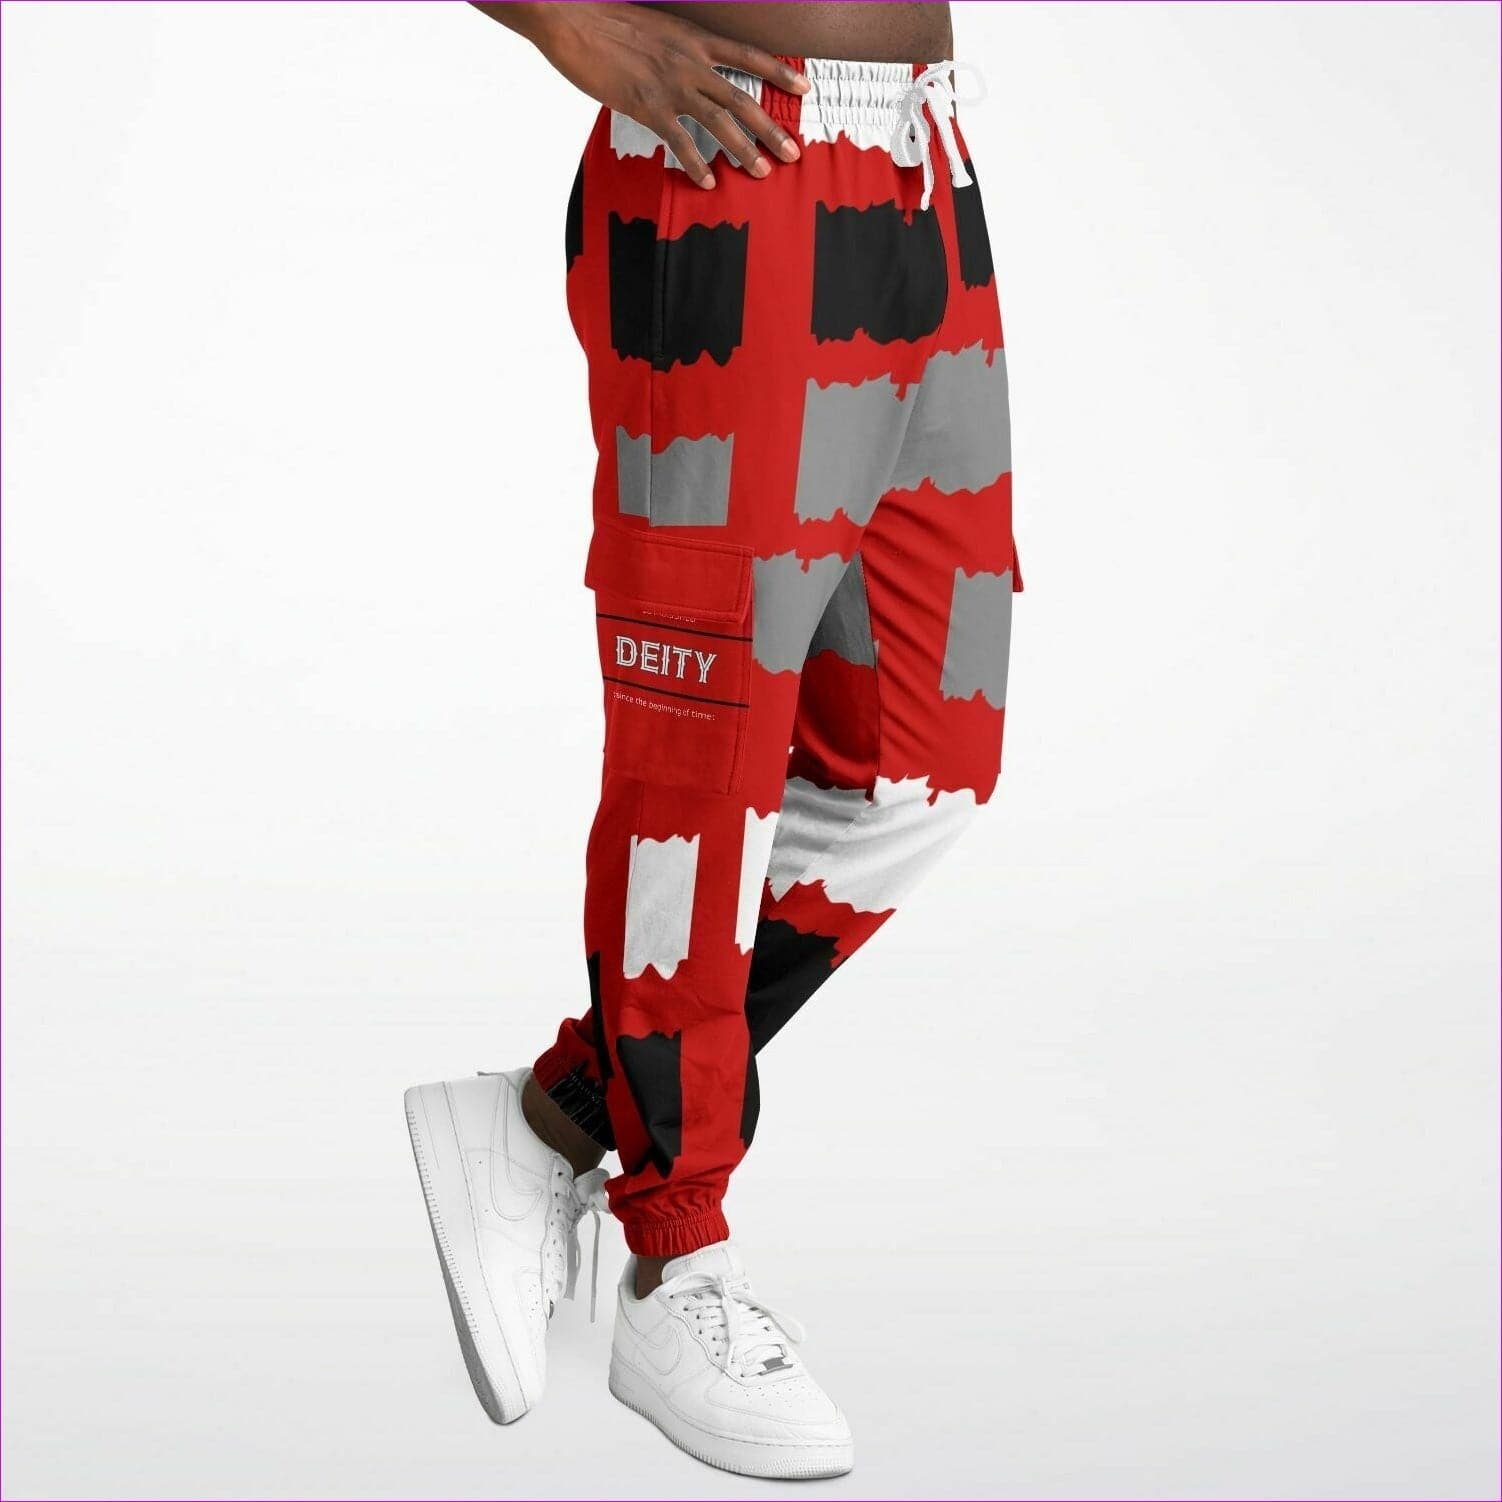 - Deity Premium Cargo Sweatpants in Red - Fashion Cargo Sweatpants - AOP at TFC&H Co.